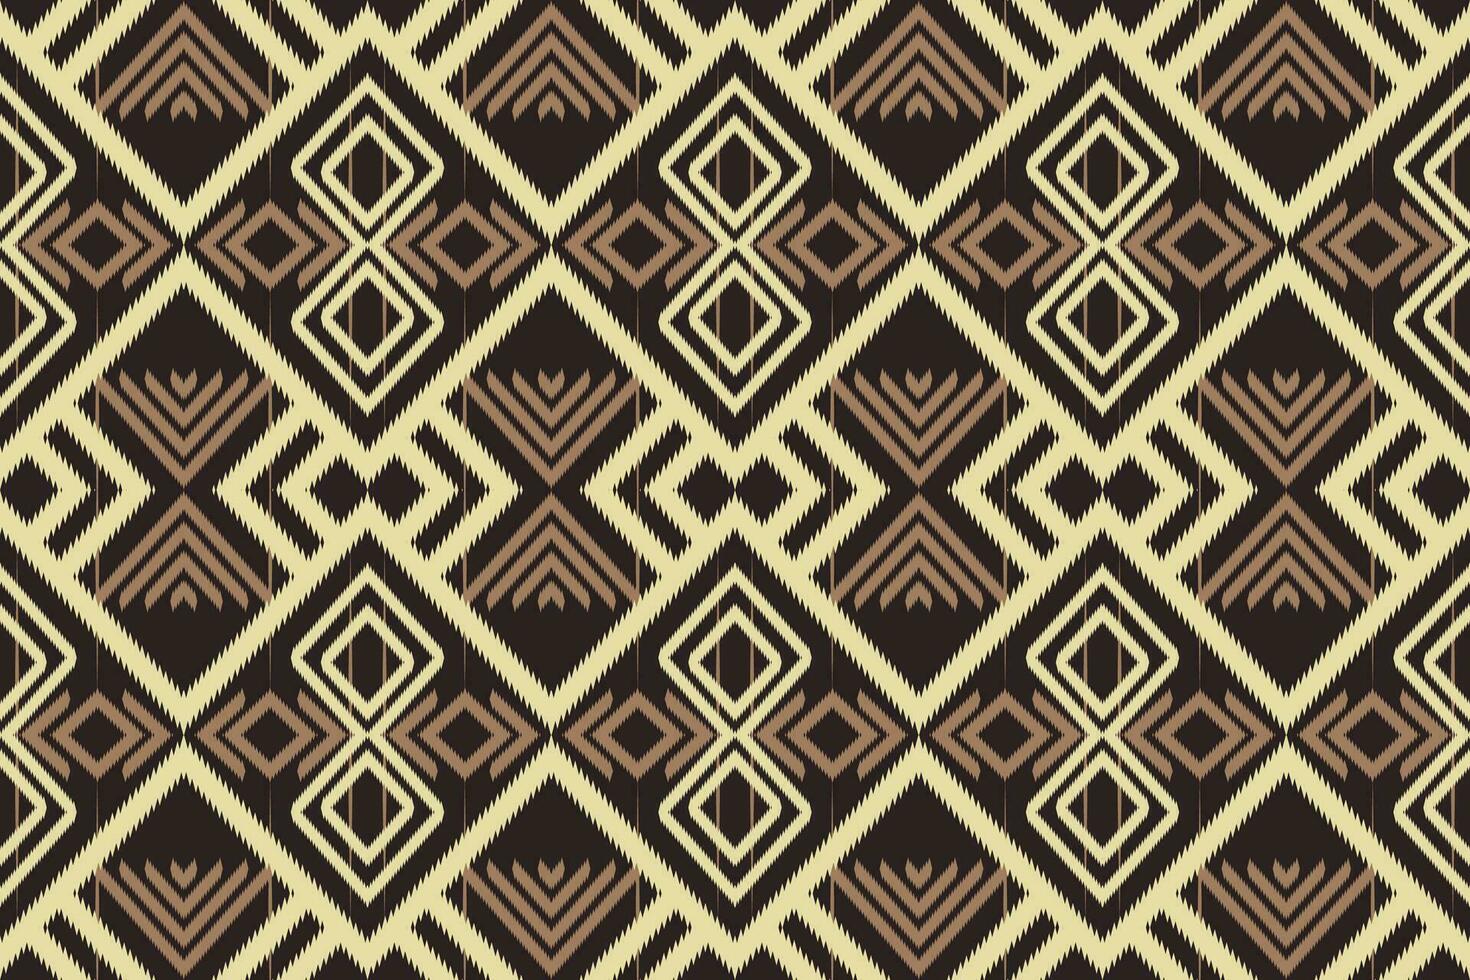 Ethnic abstract ikat seamless pattern in tribal.Fabric Indian and maxican style. Design for background, wallpaper, illustration, fabric, clothing, carpet, textile, batik, embroidery. vector